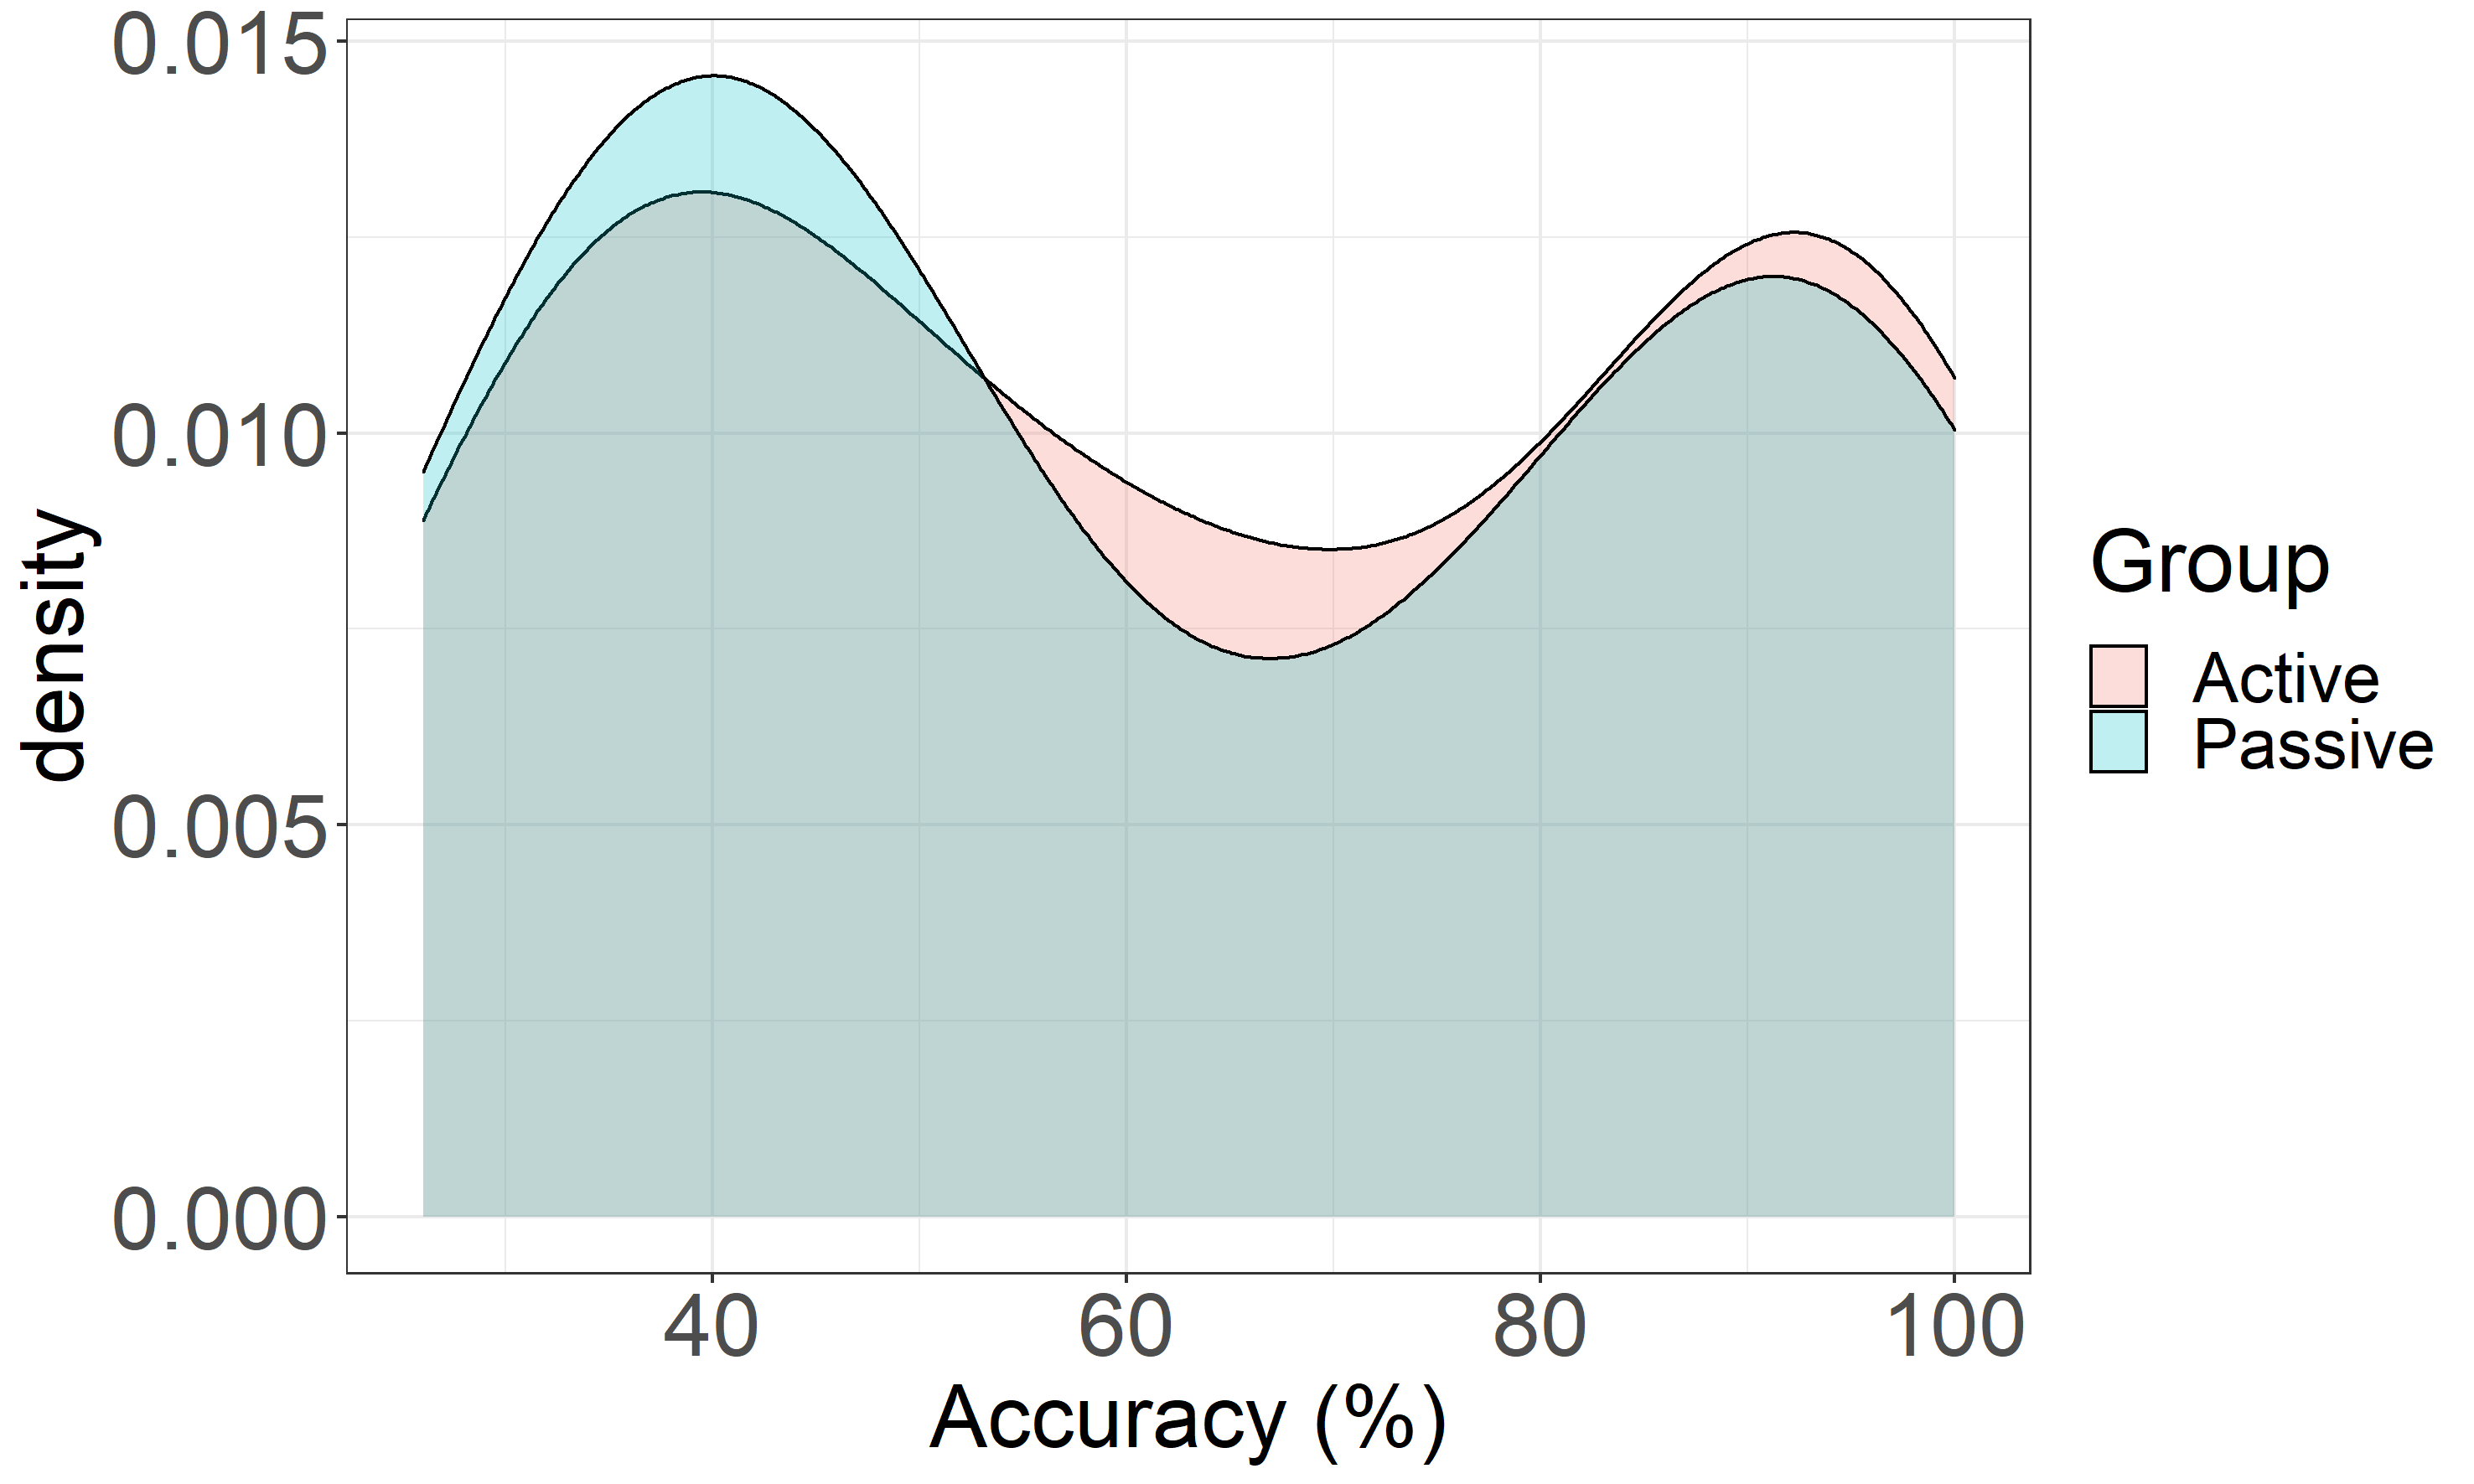 Distribution of Accuracy in the Learning Check. Distribution of accuracy for the two groups of participants (active learners are shown in pink and passive learners in blue. The two groups did not differ in their performance on the learning check task.